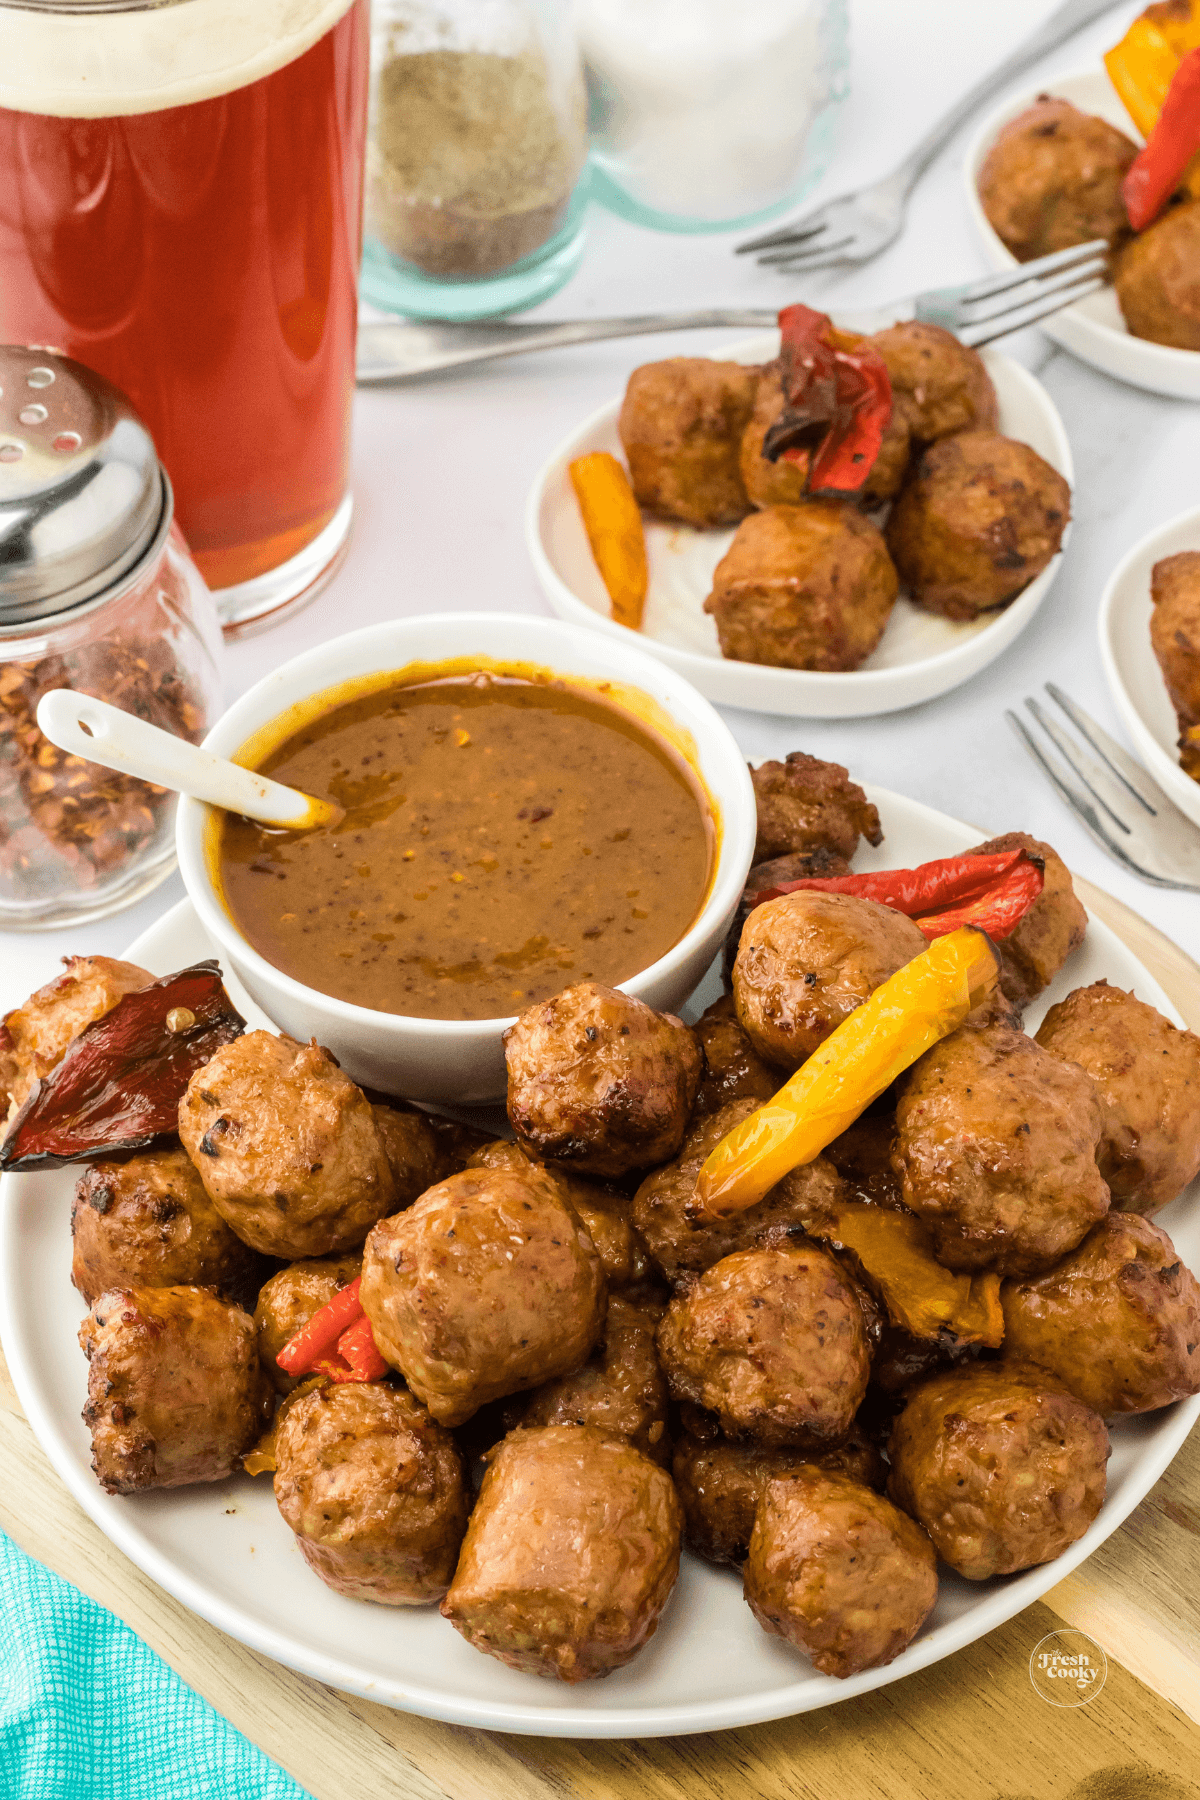 Plate filled with sausage bites and mustard ale dipping sauce.